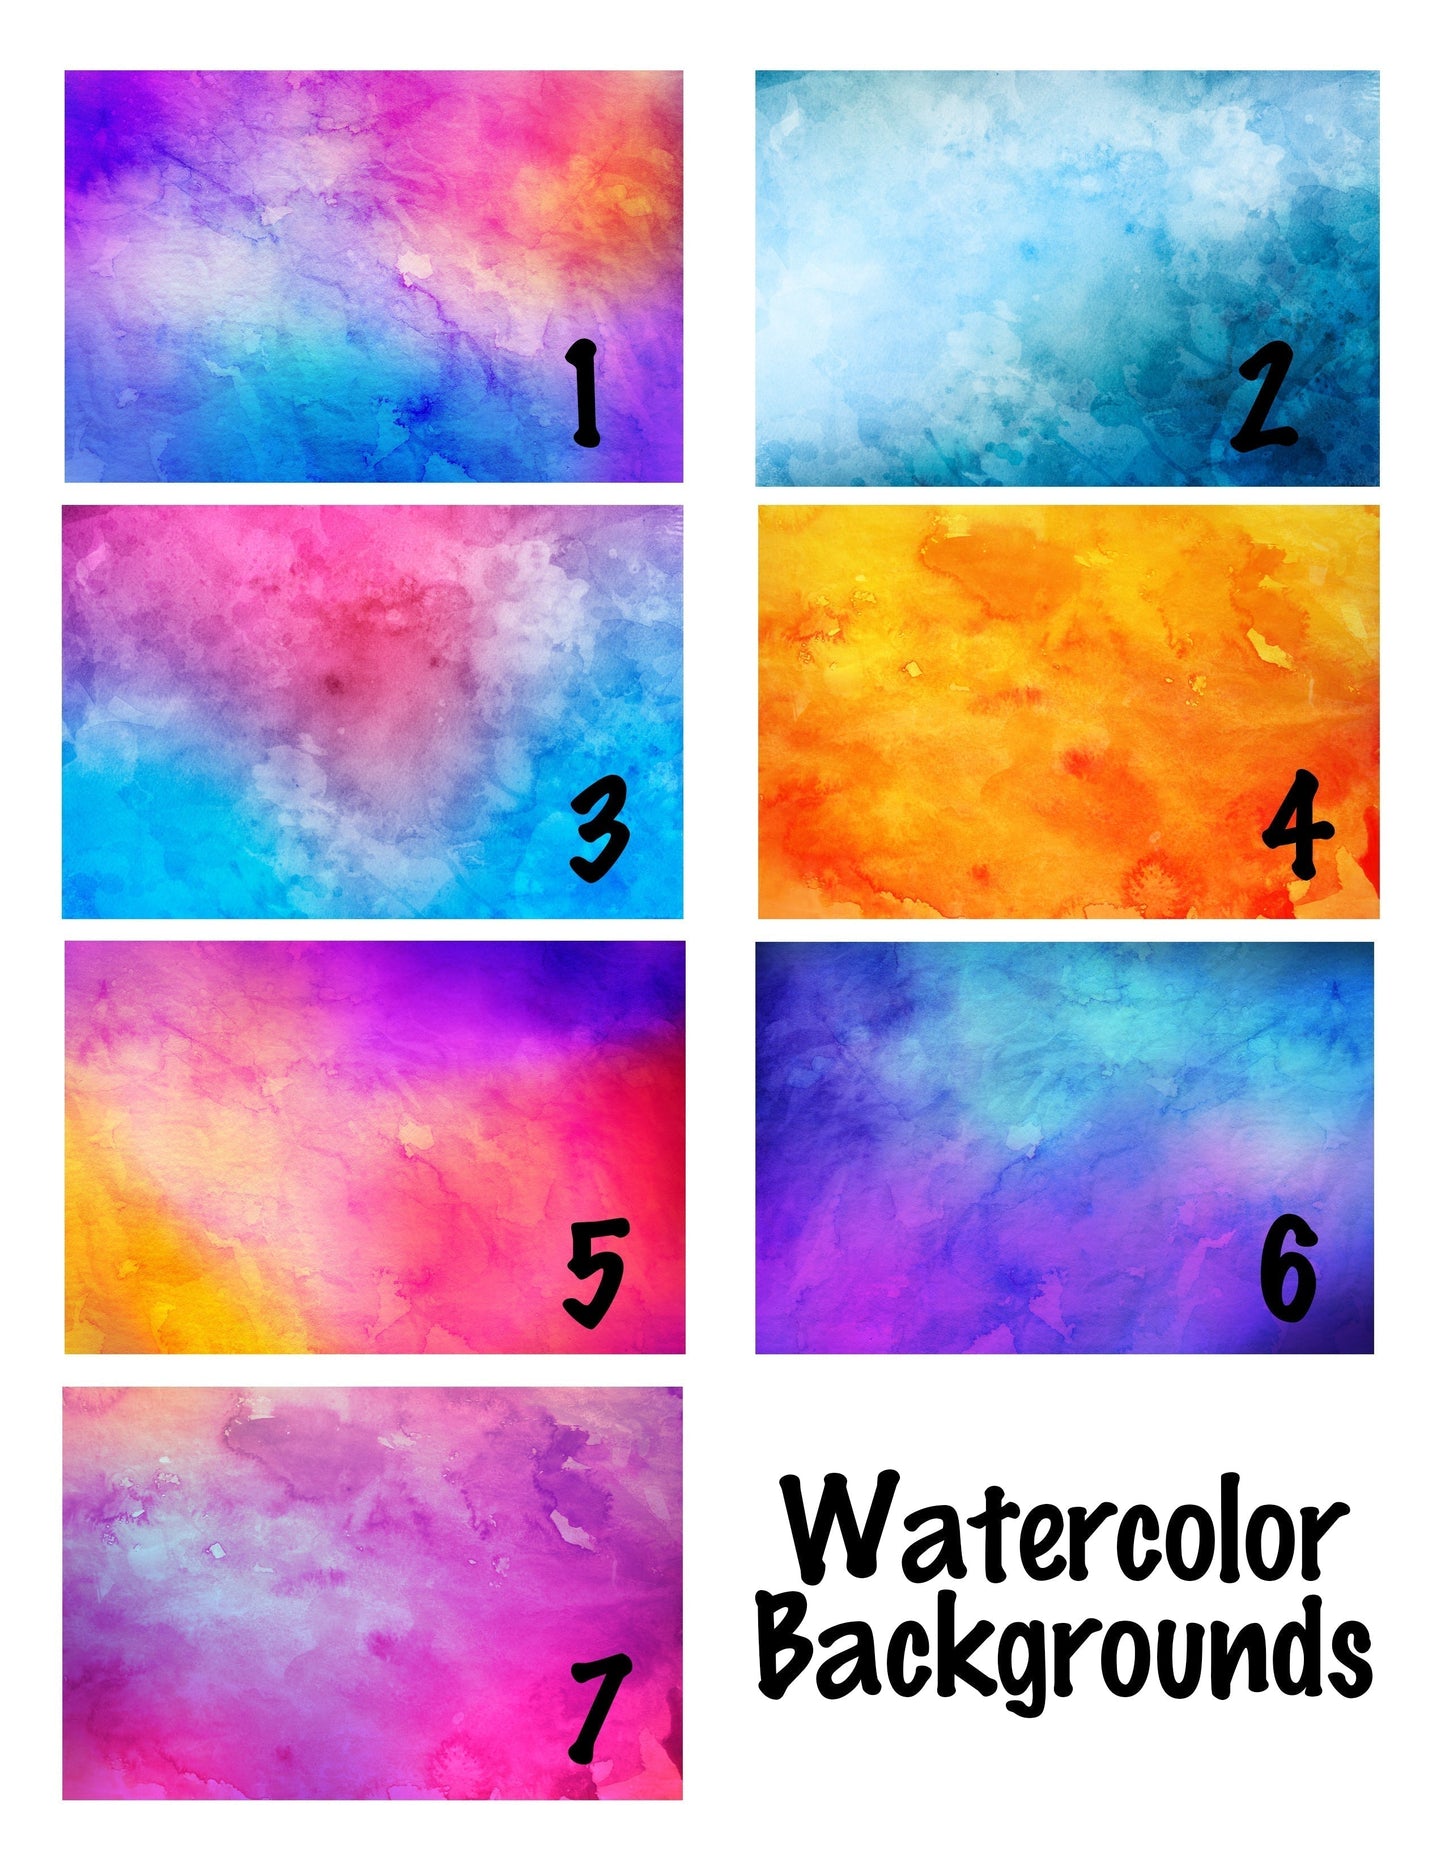 Karate Cooling Towel with Watercolor Background